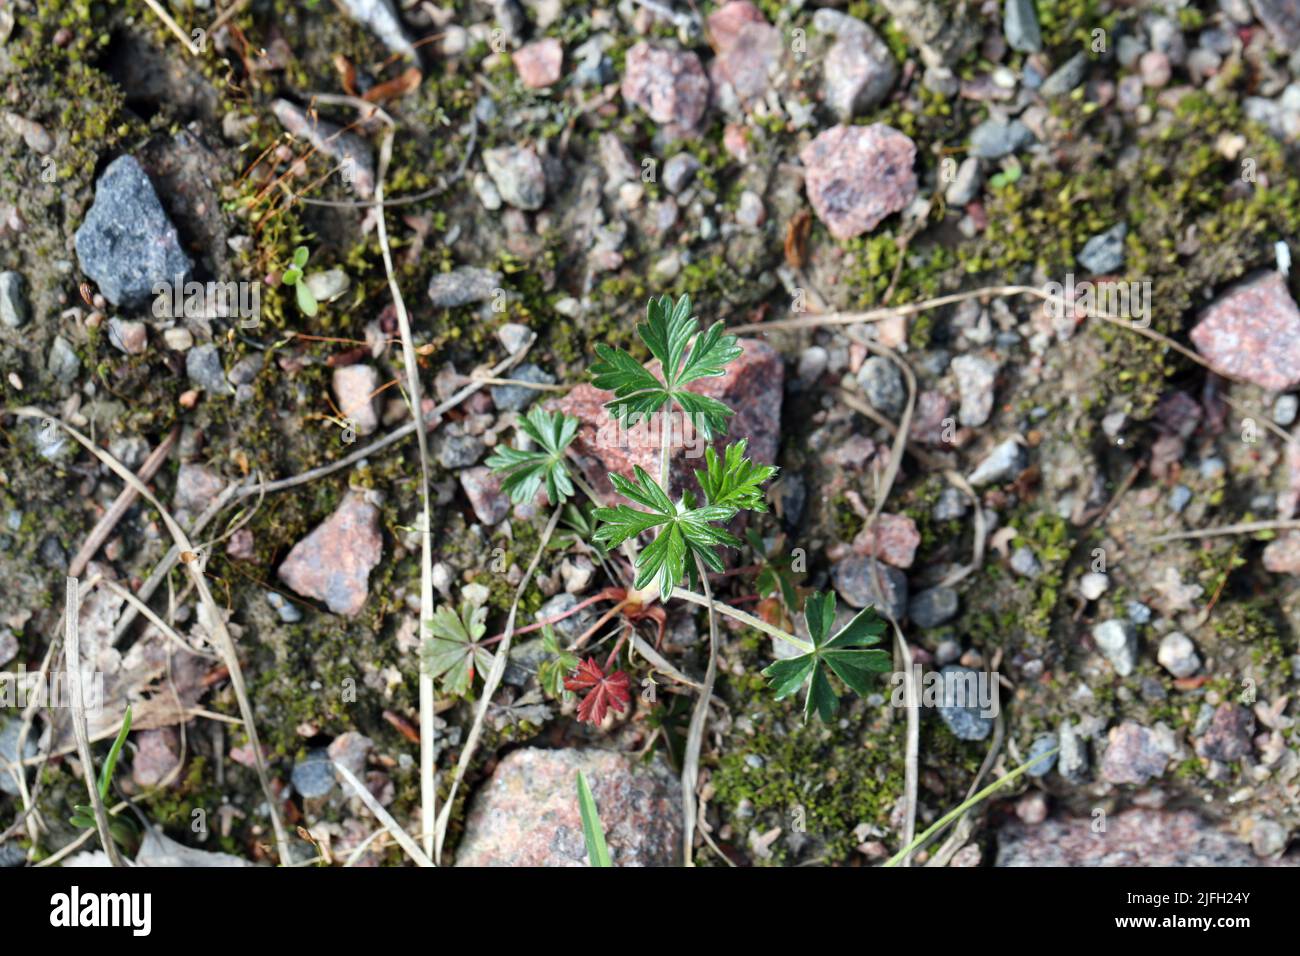 Small green plant with some rocks and moss photographed from above. Color image. Stock Photo